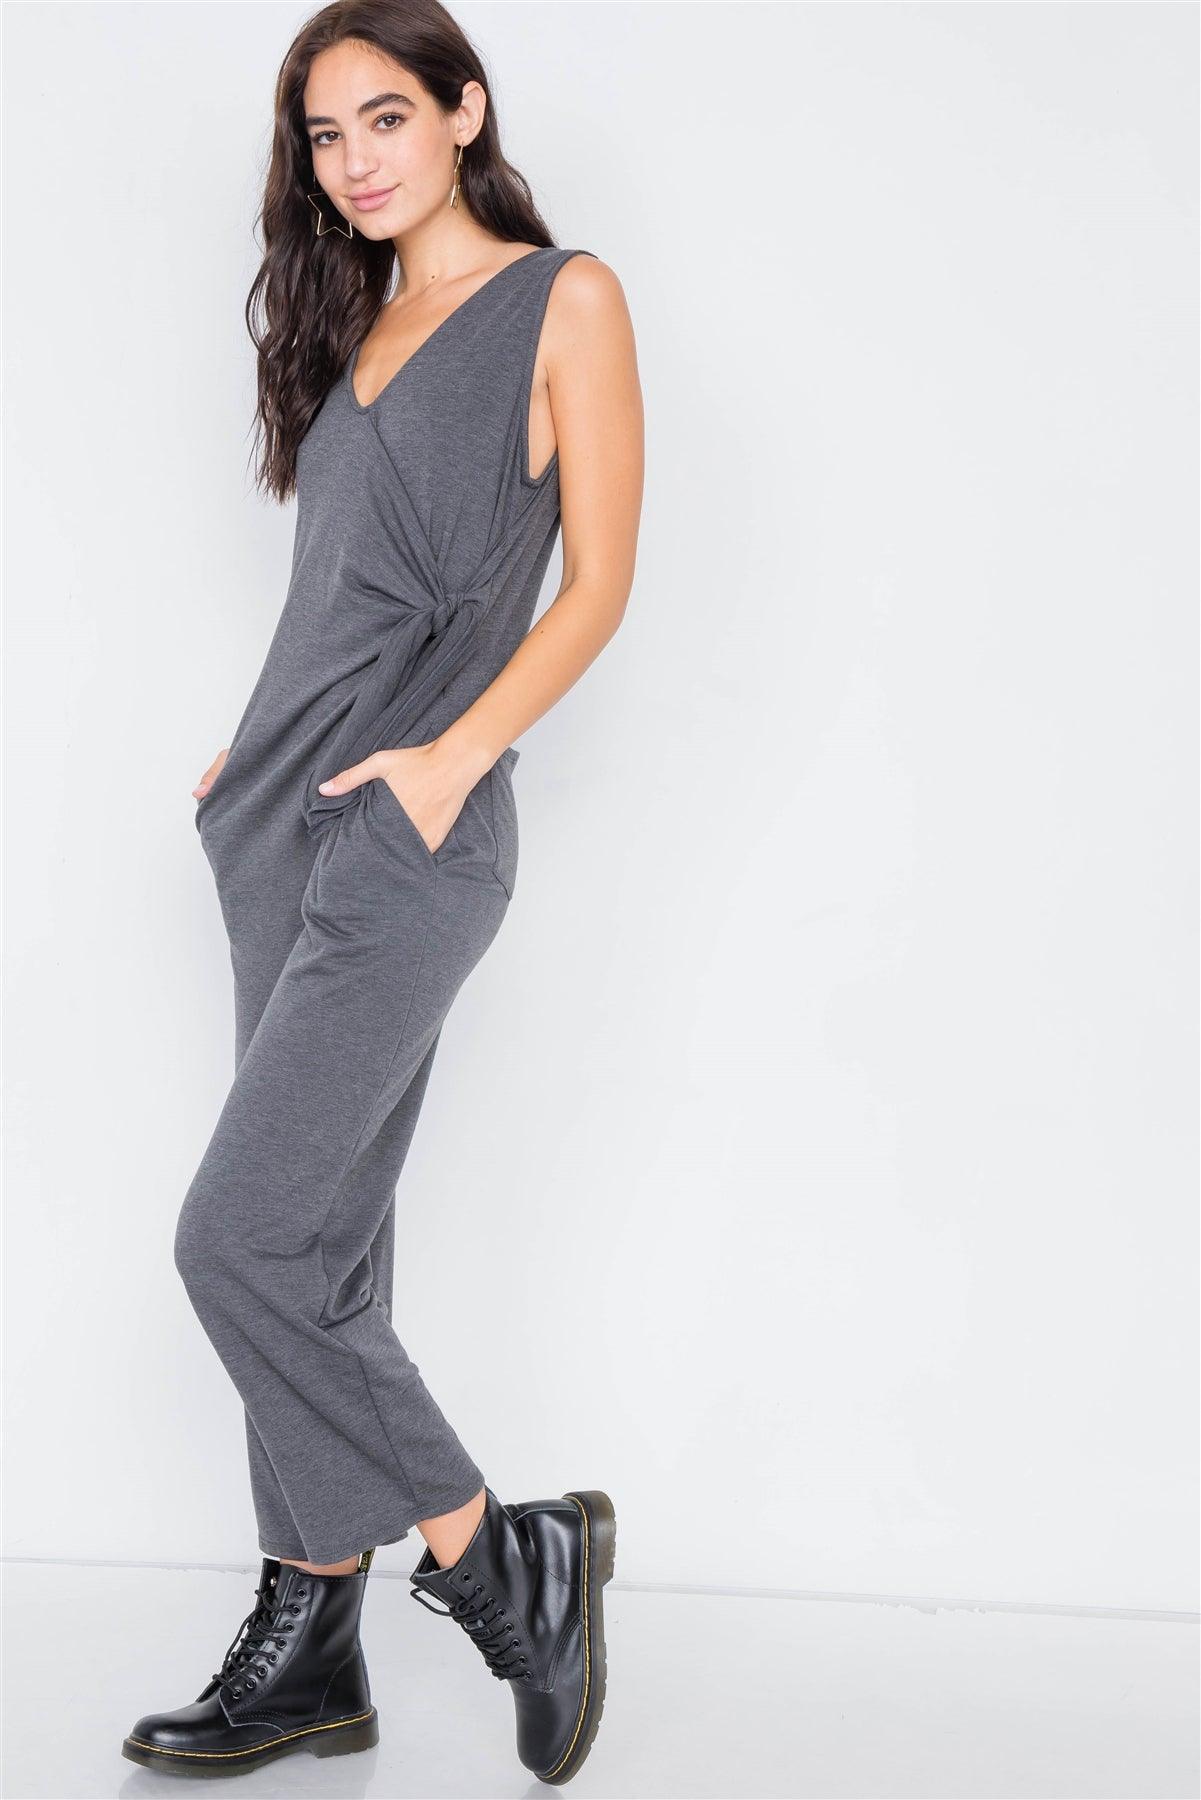 Charcoal Marled Knit Mock Wrap Ankle Length Jumpsuit